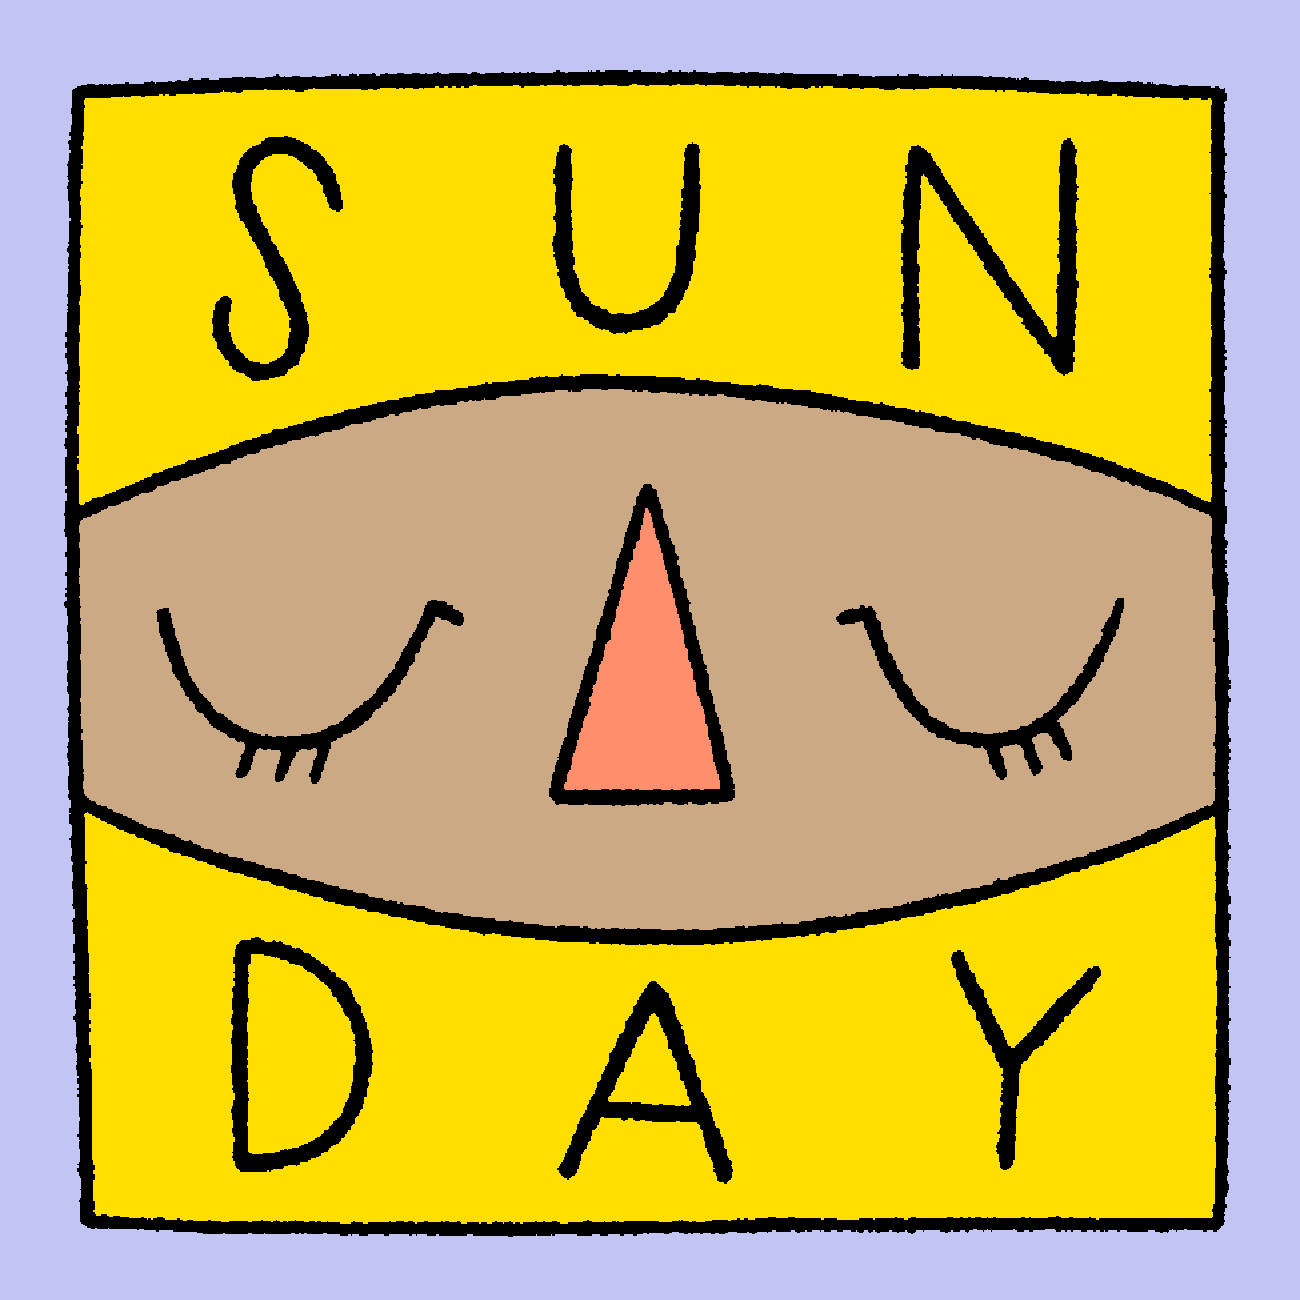 Illustrated gif. One eye blinks on an abstract oval face between text that reads, "Sunday."